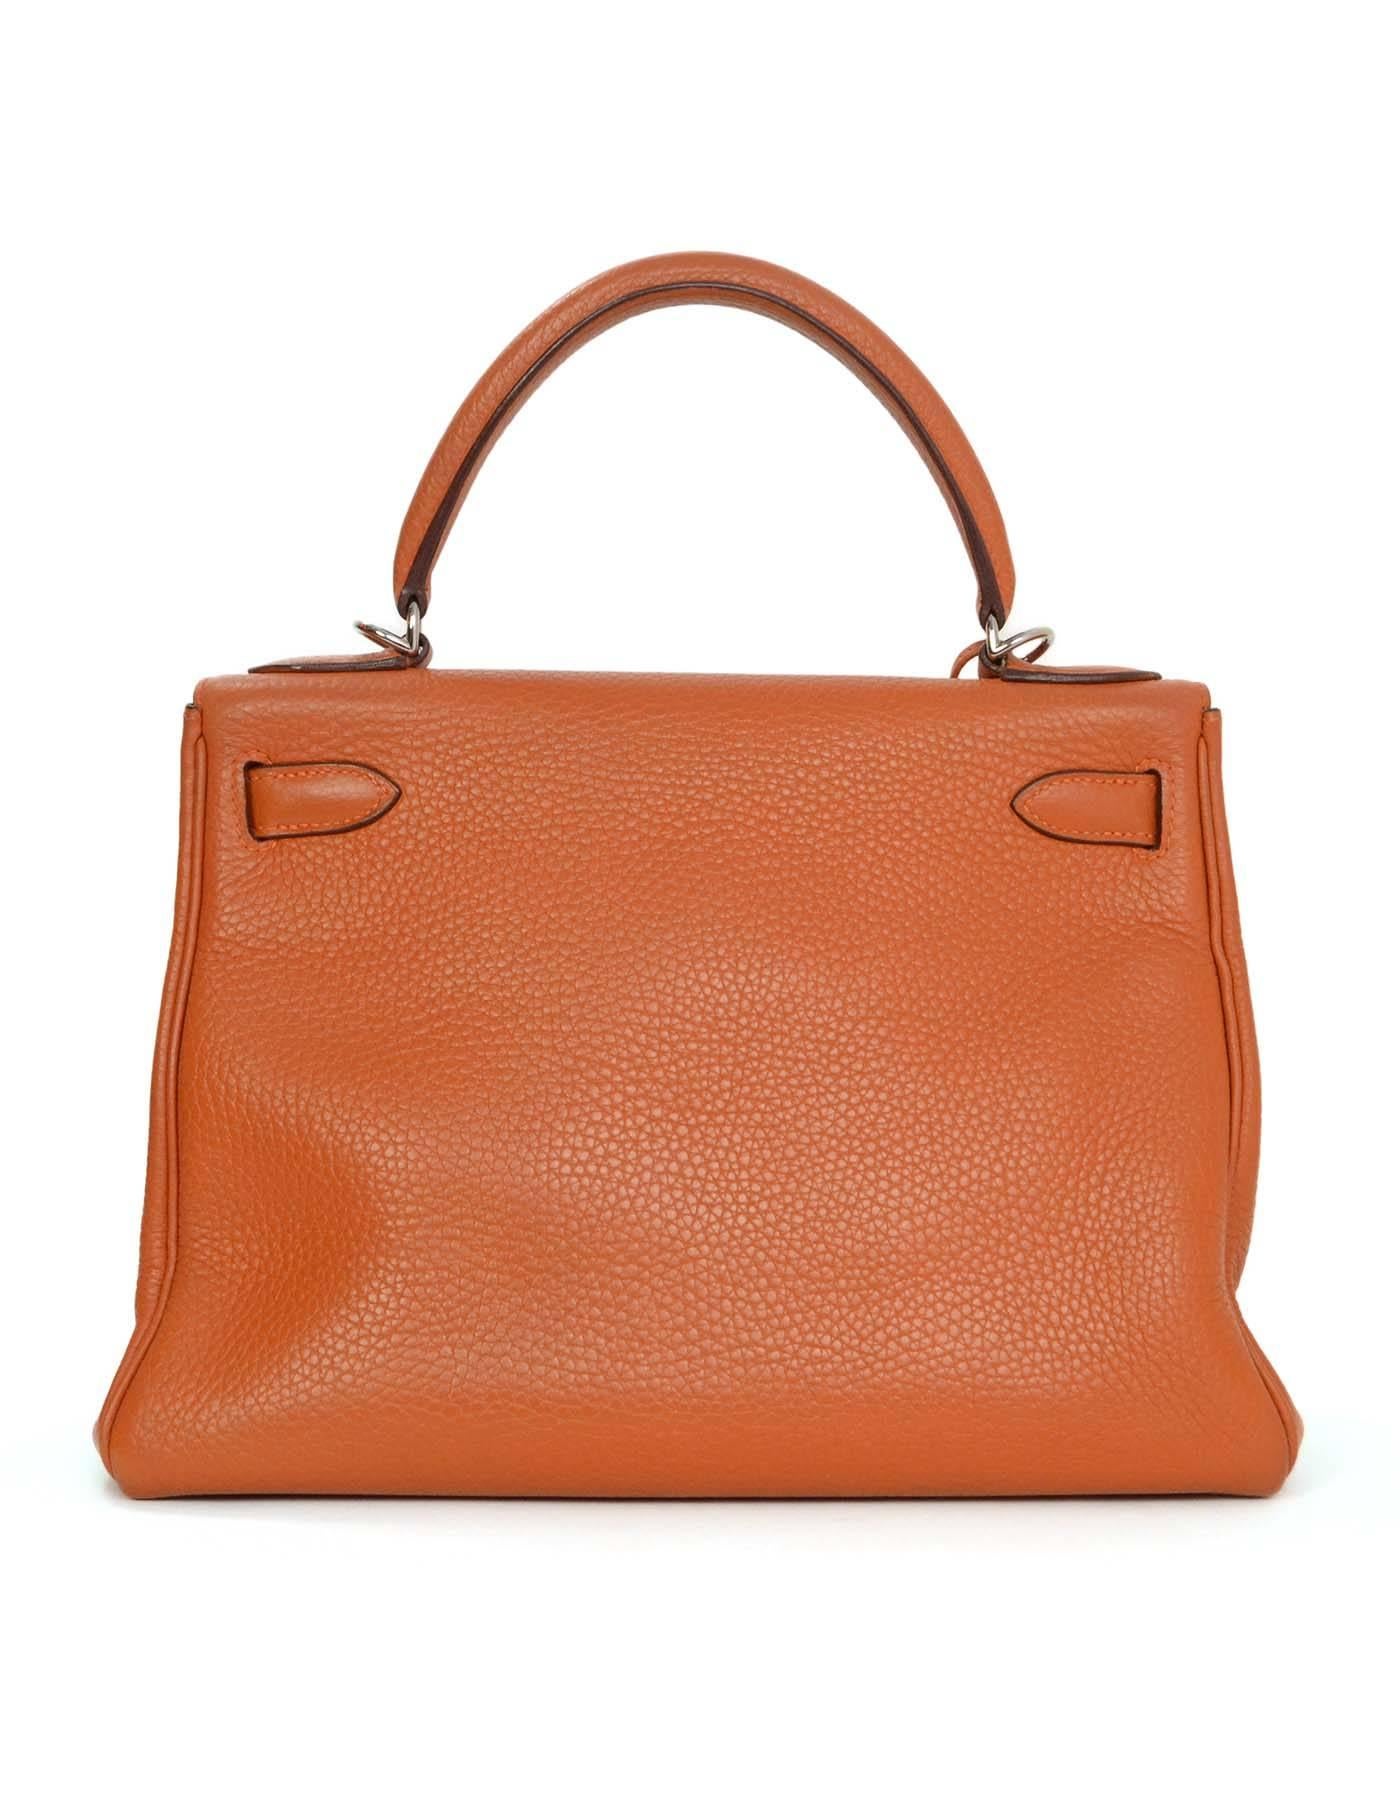 Hermes Orange Clemence 28cm Kelly Bag 
Features removable shoulder/crossbody strap
Made in: France
Year of Production: 2004
Color: Orange
Hardware: Palladium
Materials: Clemence leather
Lining: Orange chevre leather
Closure/opening: Flap top